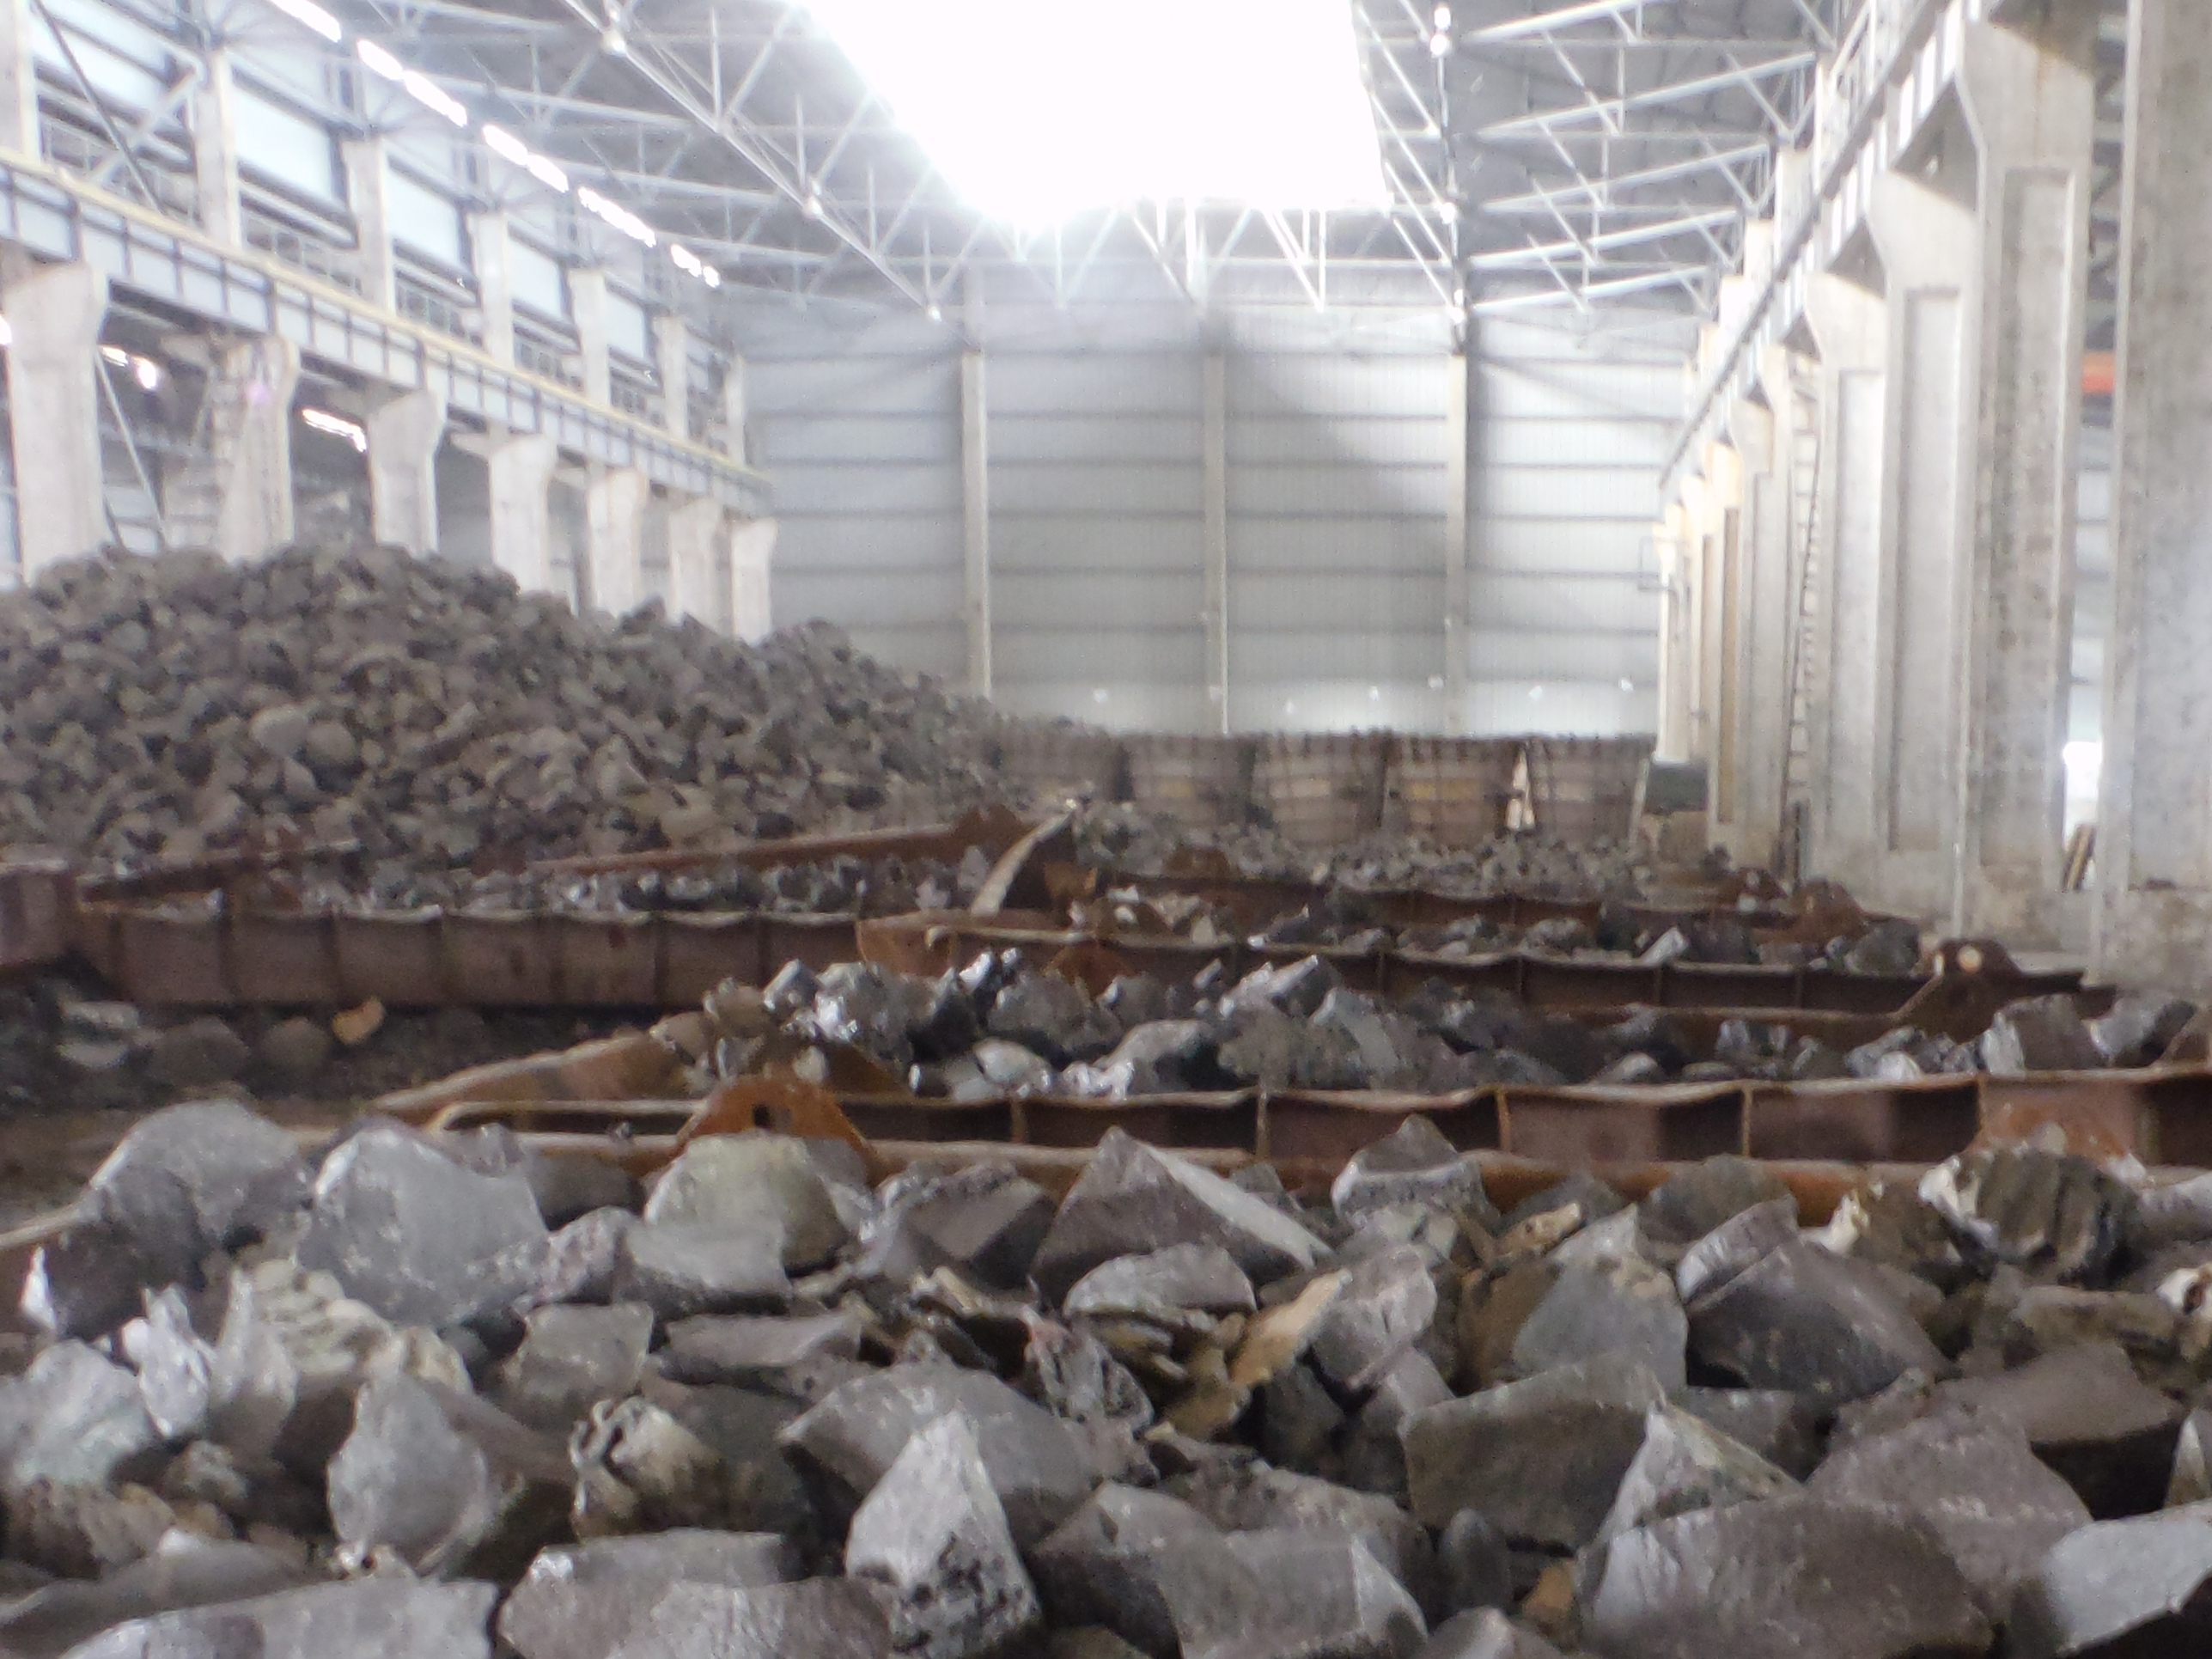 The cold ingots are being broken down by different machines into small sizes for further processing.